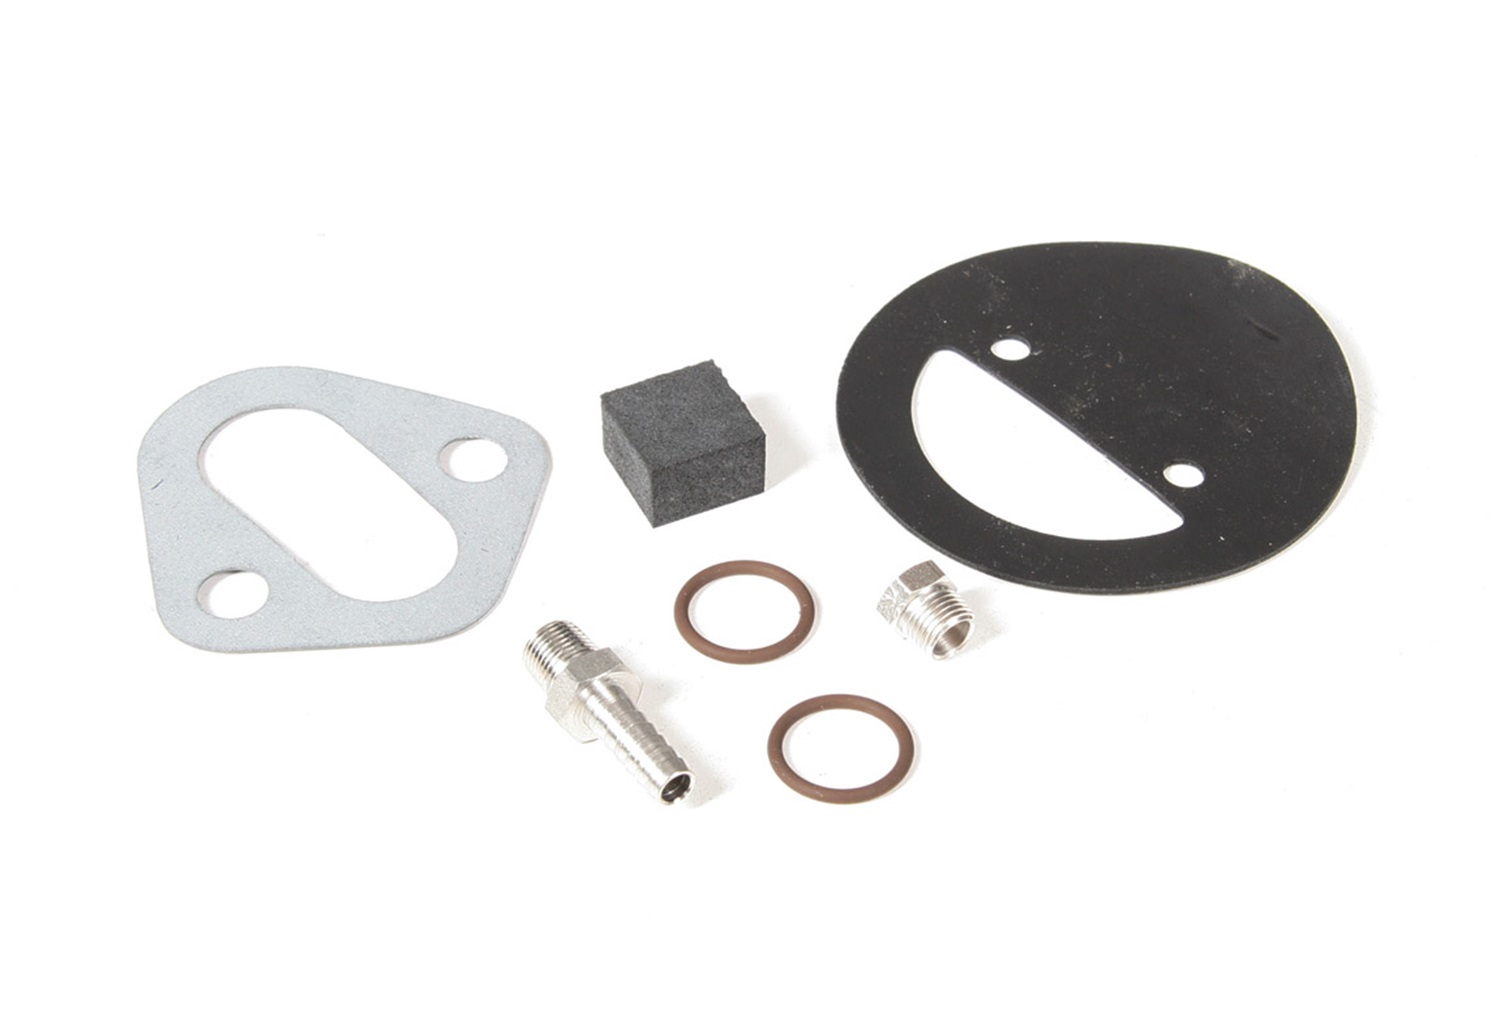 Show details for Holley 12-757 Fuel Pump Gasket Replacement Kit